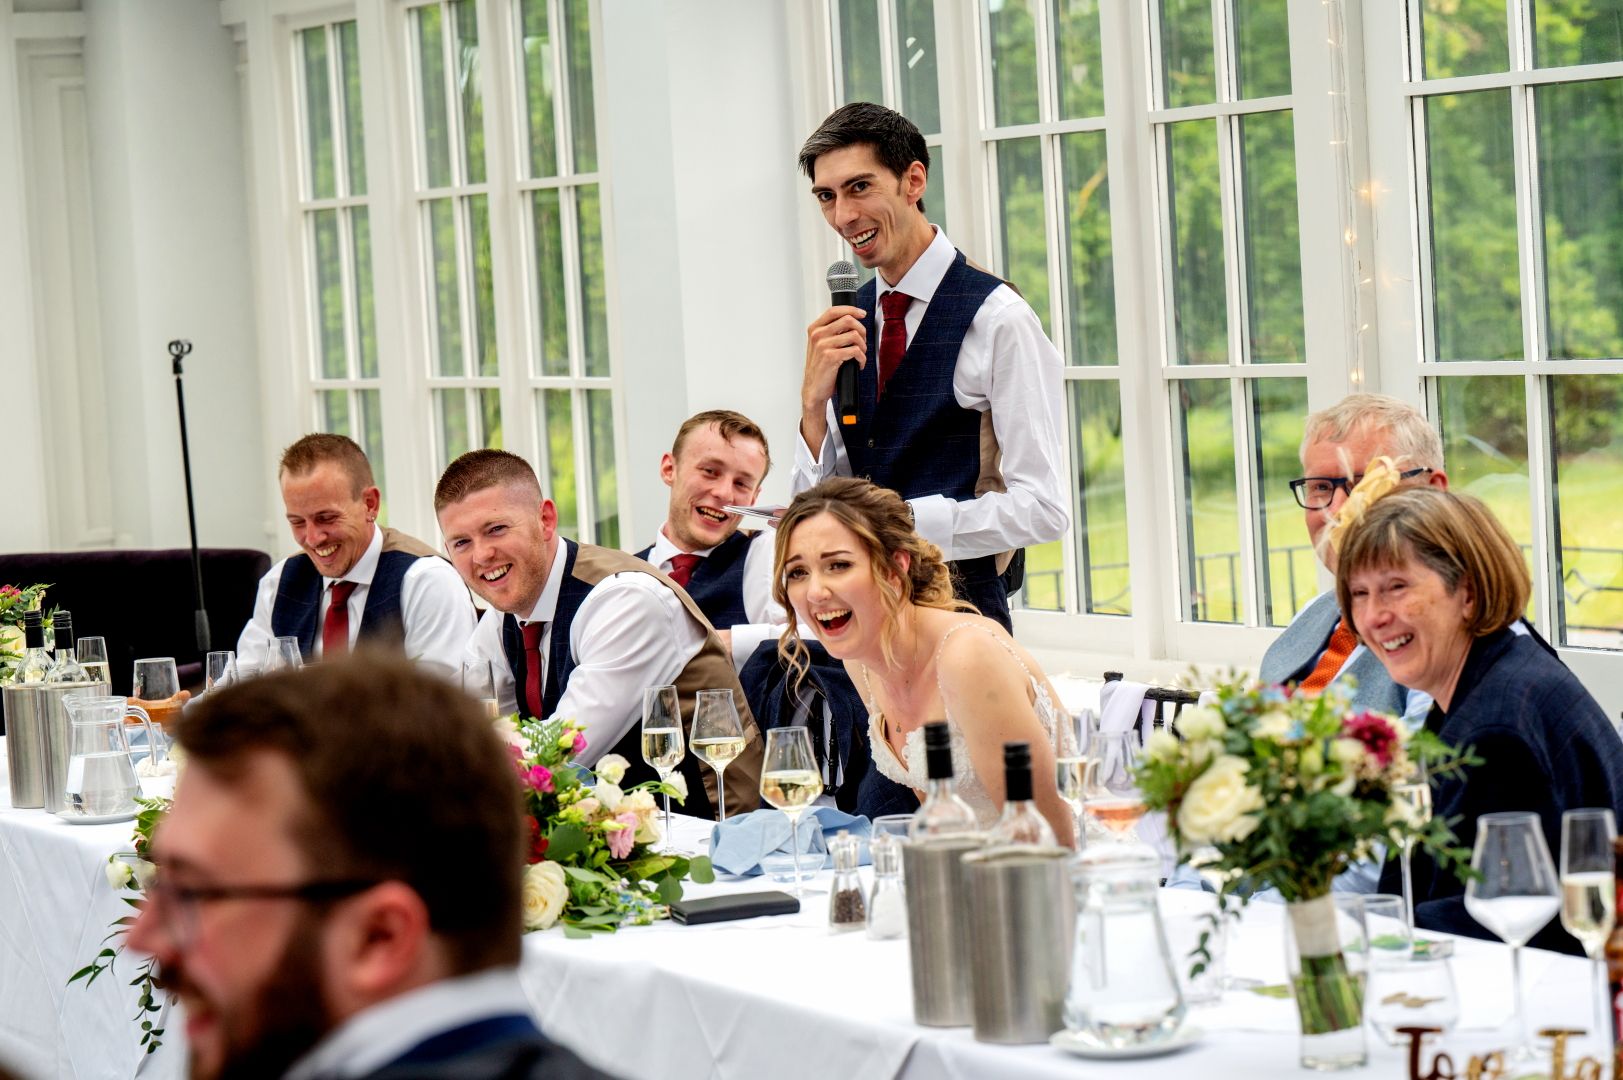 The top table laughing during Ross' speech at Swynford Manor. Photo by Fountain Photography.